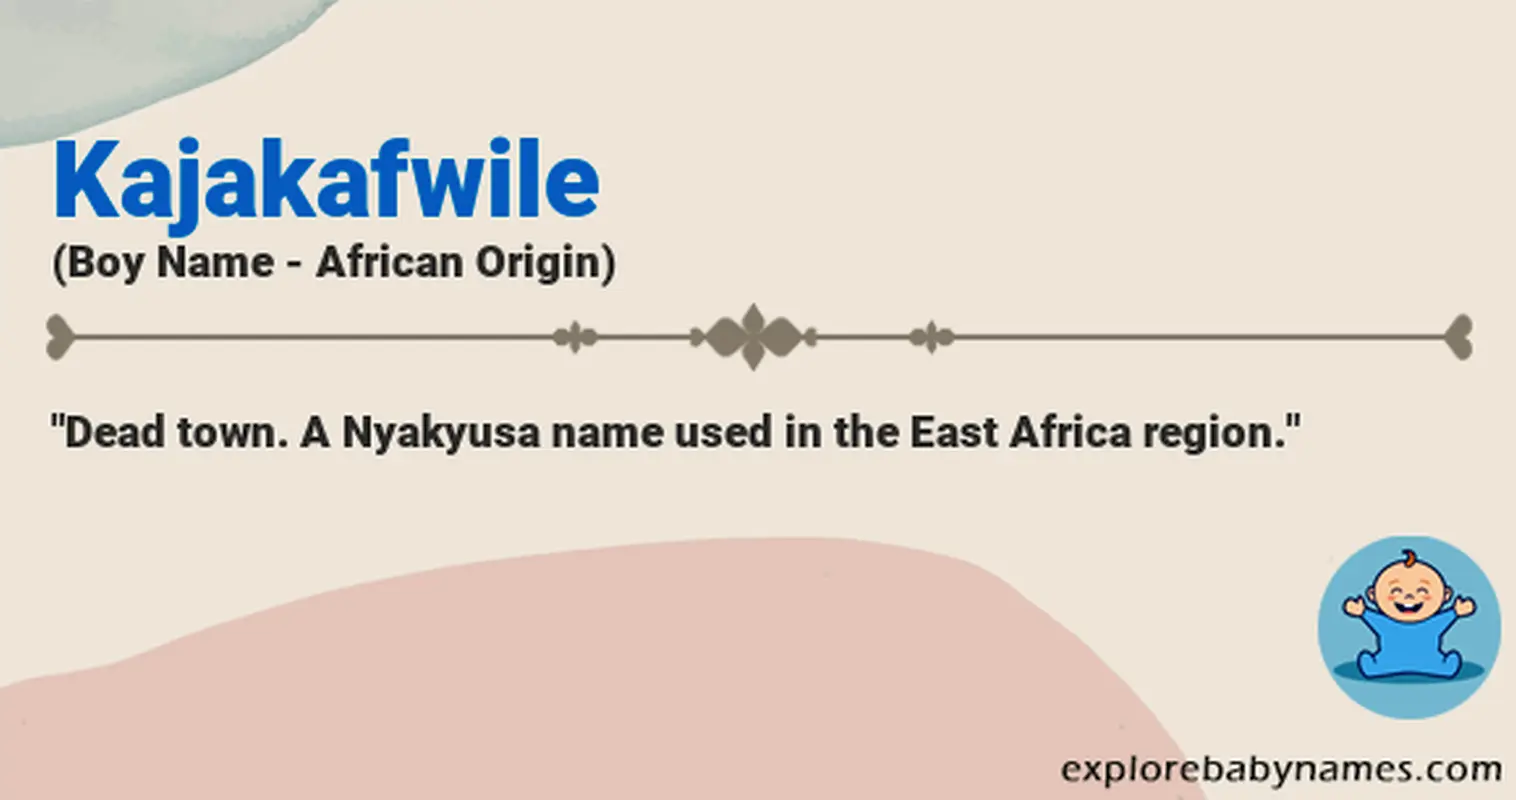 Meaning of Kajakafwile